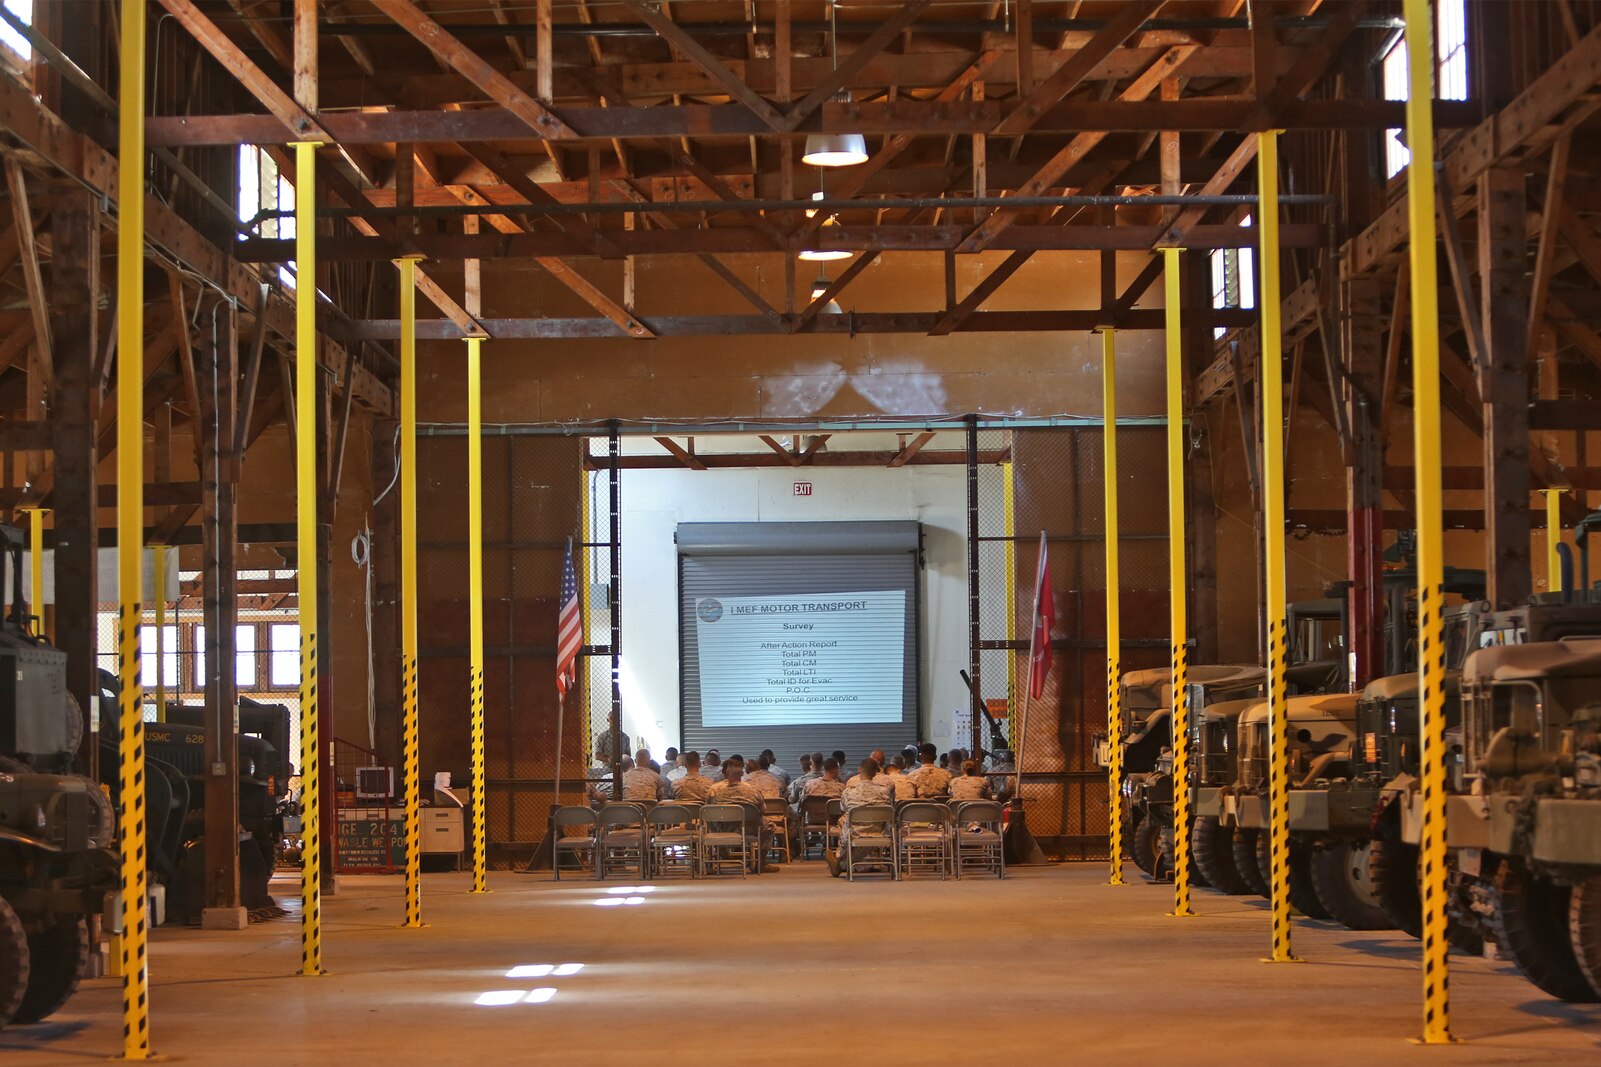 Marines with 1st Marine Logistics Group and 1st Marine Expeditionary Force participate in a motor transportation conference aboard Camp Pendleton, Calif., July 10, 2014. The event provided its participants with a overview of the logistics and motor transportation side of the Marine Corps, and how the processes apply in a forward environment, where 1st MLG complements IMEF’s expeditionary capabilities. In addition, the forum gave its participants a dynamic environment where they could communicate with each other freely and discuss current issues, improvements and solutions within the field of motor transport. “It’s important to keep everyone at all levels well-informed,” said 1st Lt. Dominic Svatos, motor transportation platoon commander with 7th Engineer Support Battalion, 1st MLG, and a Kansas City, Mo., native. “The more junior NCOs can disseminate the information effectively to their platoons and the information can filter down to the lower levels, keeping them updated.” 